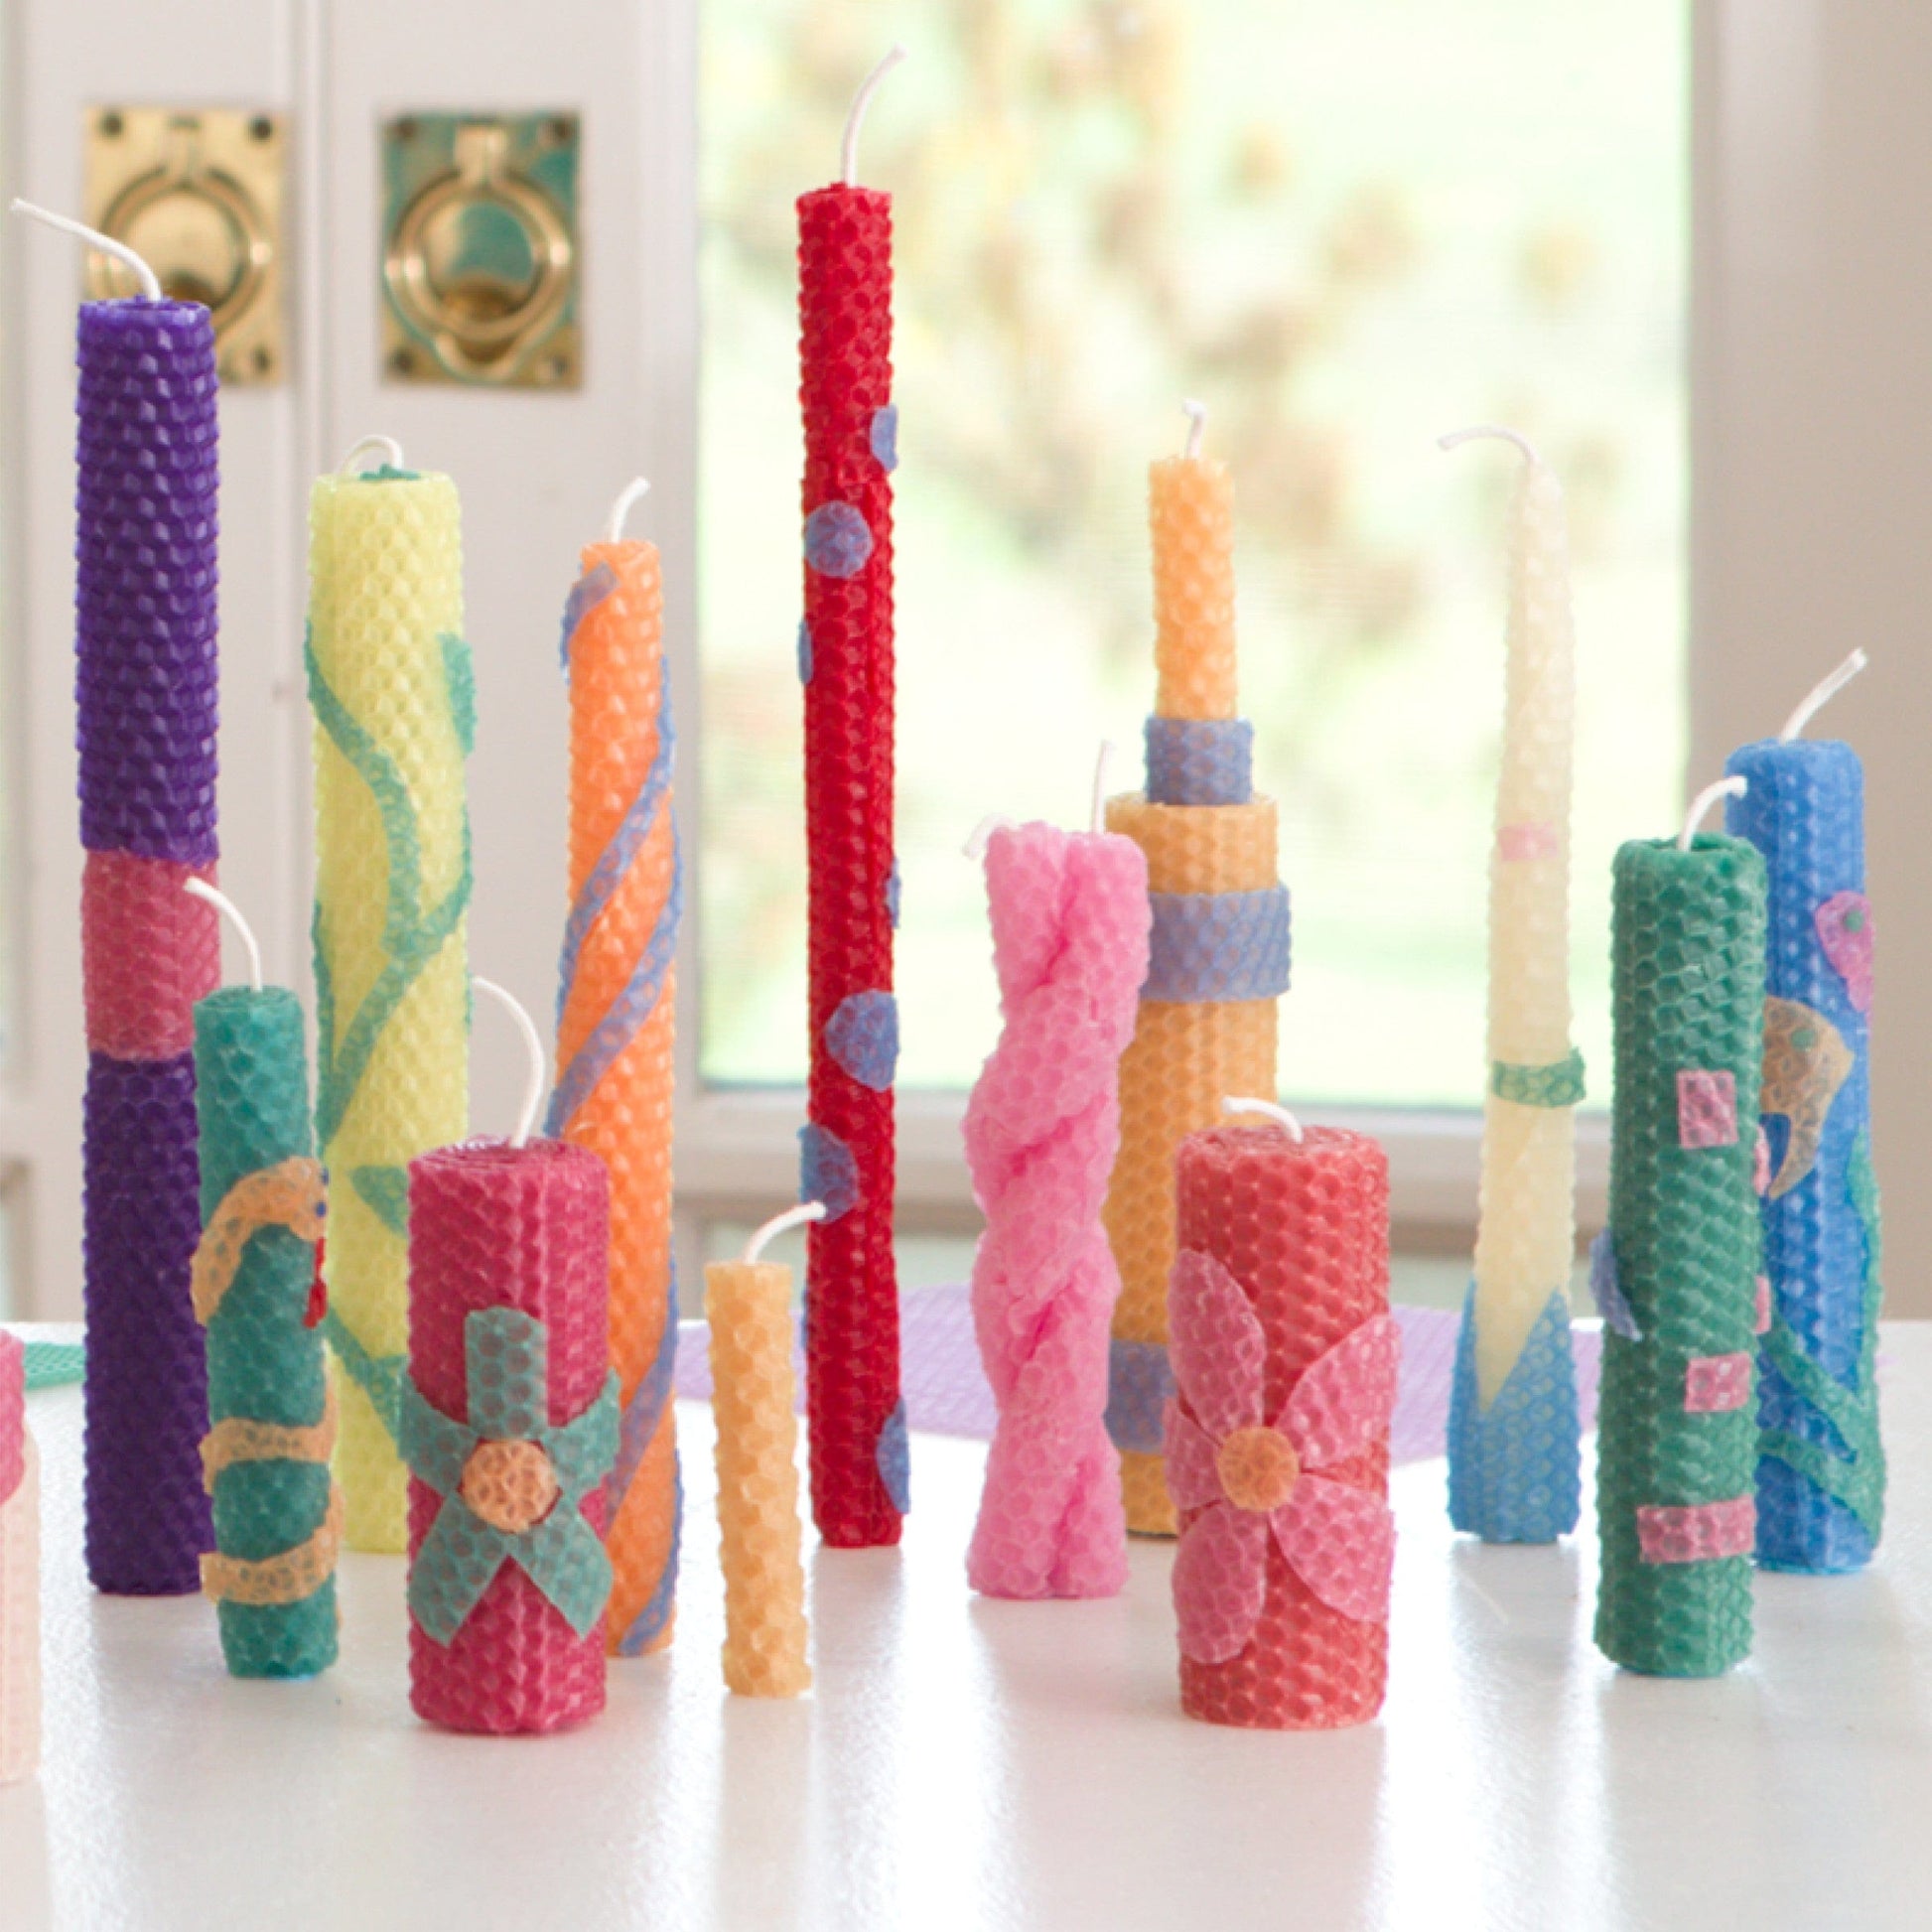 How to make beeswax candles - Making beeswax candles